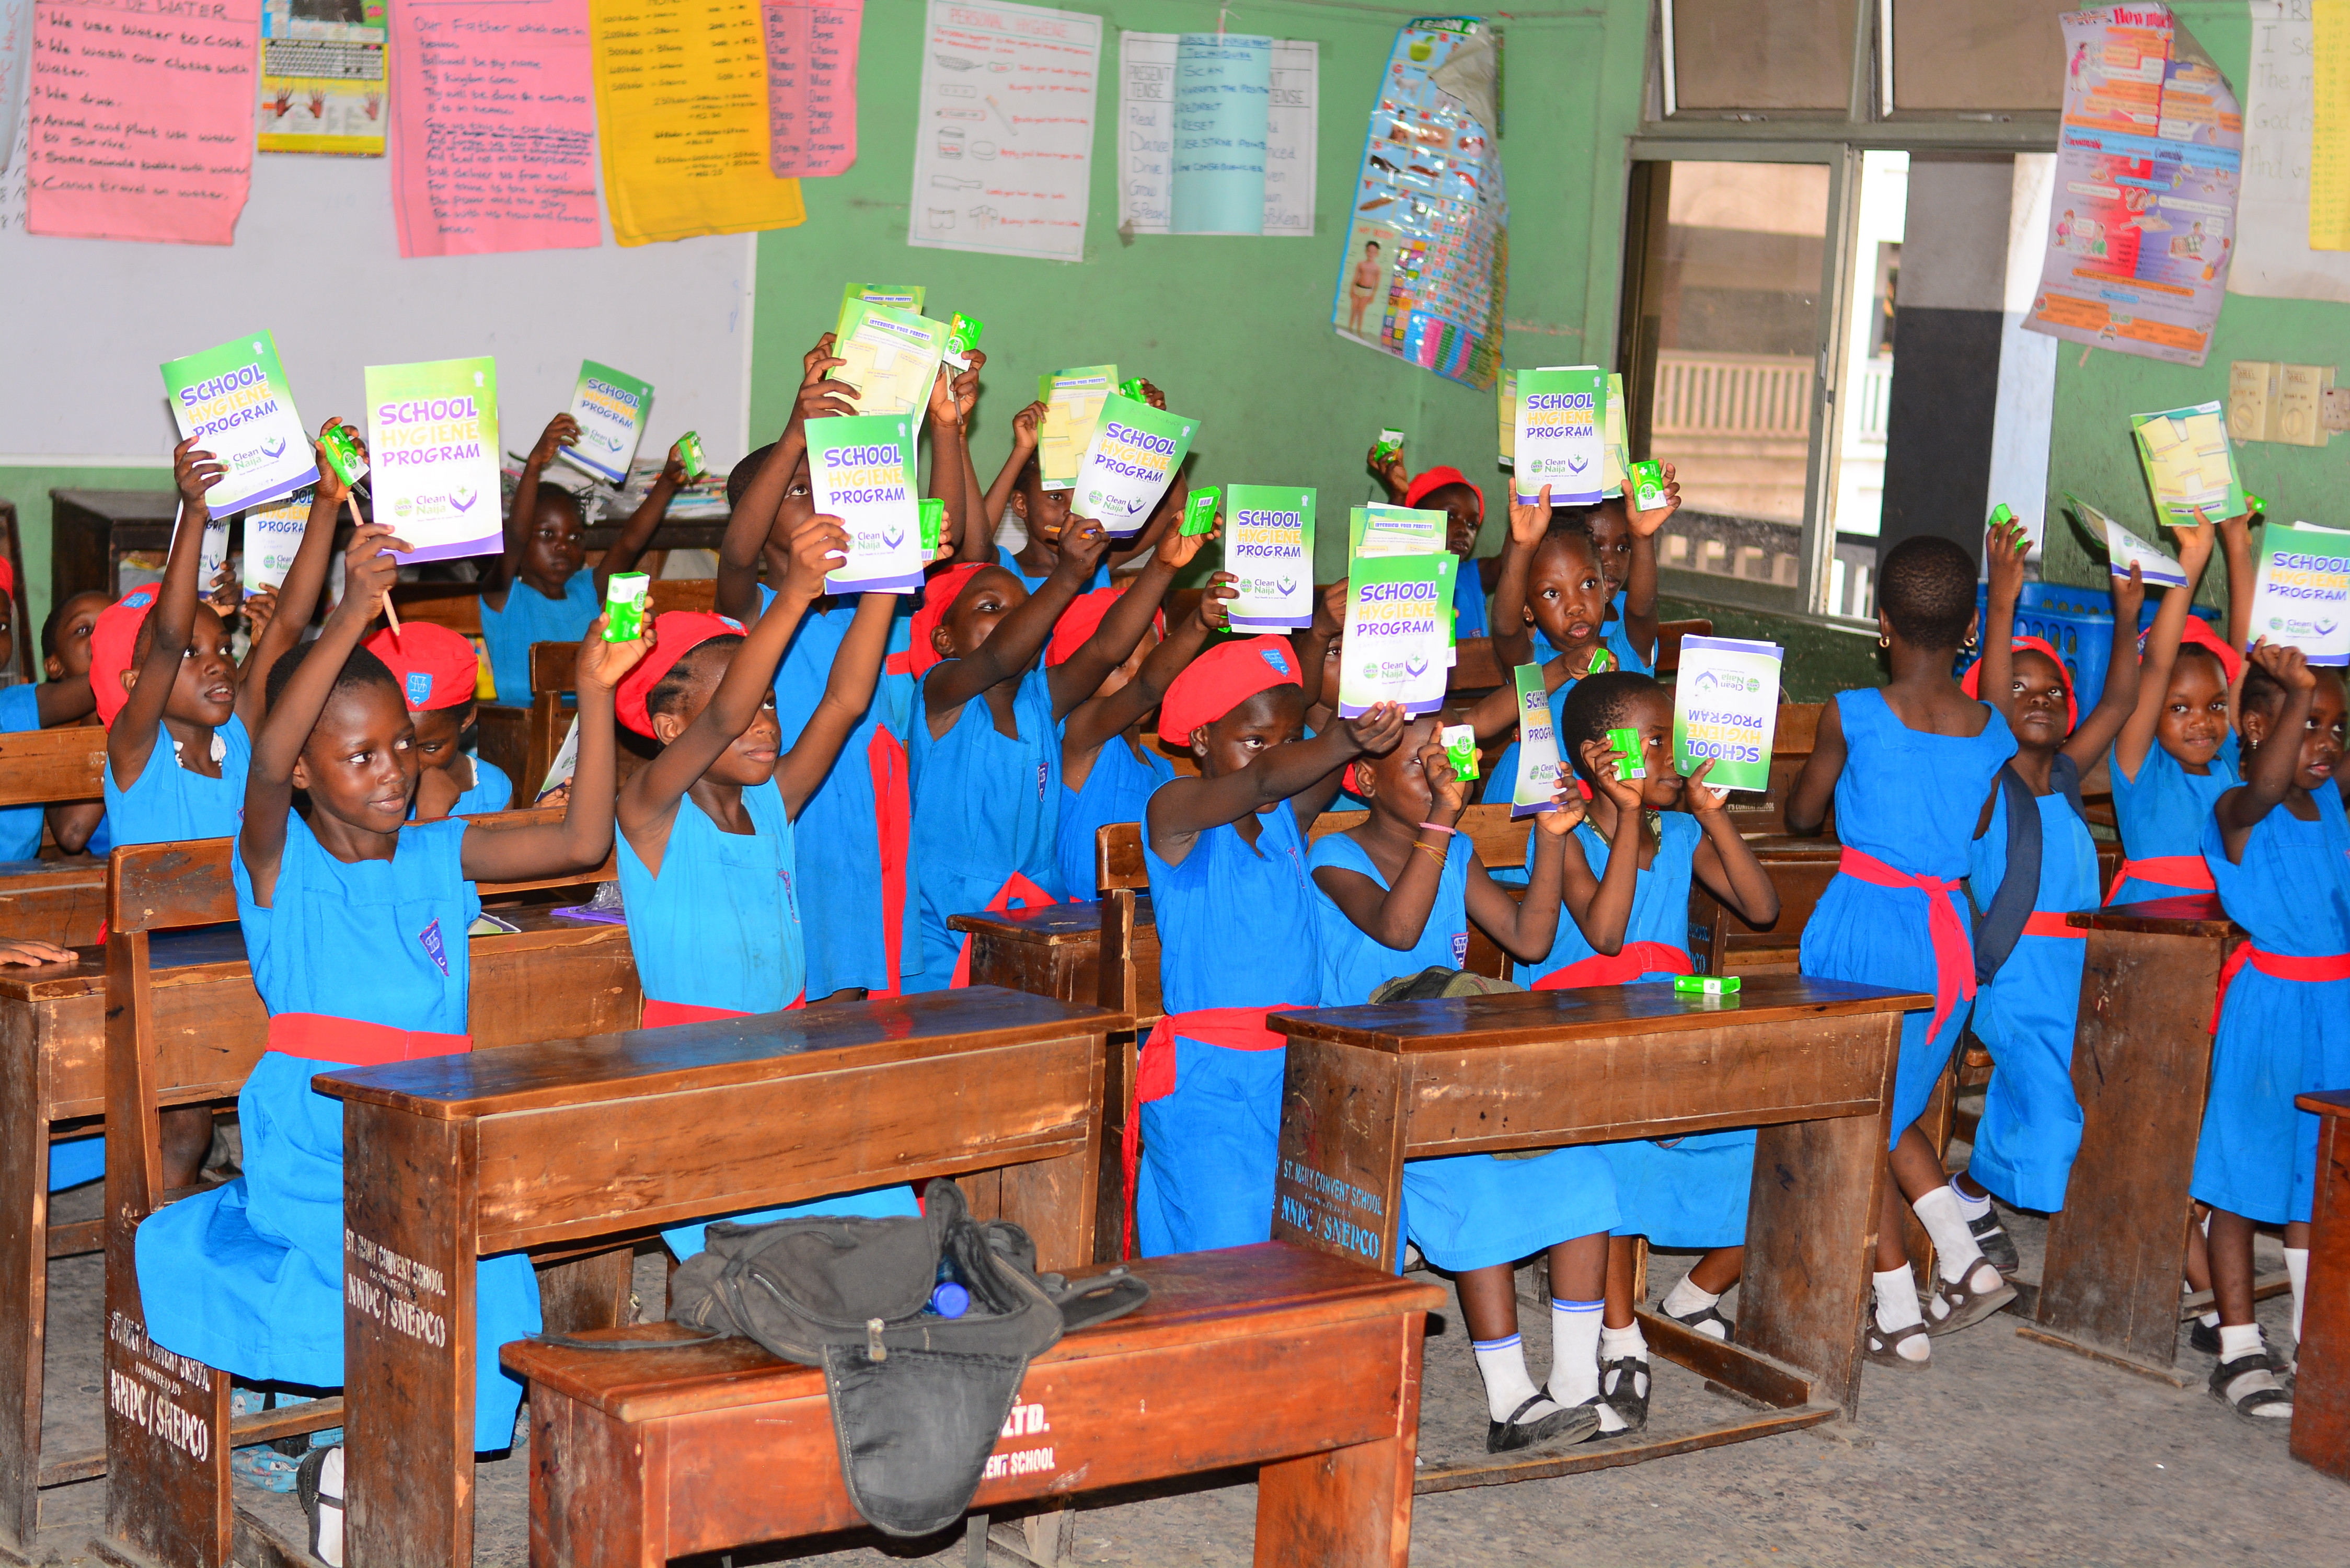 Dettol Partners with Lagos State Office of SDG to Educate 50,000 School Children on Handwashing